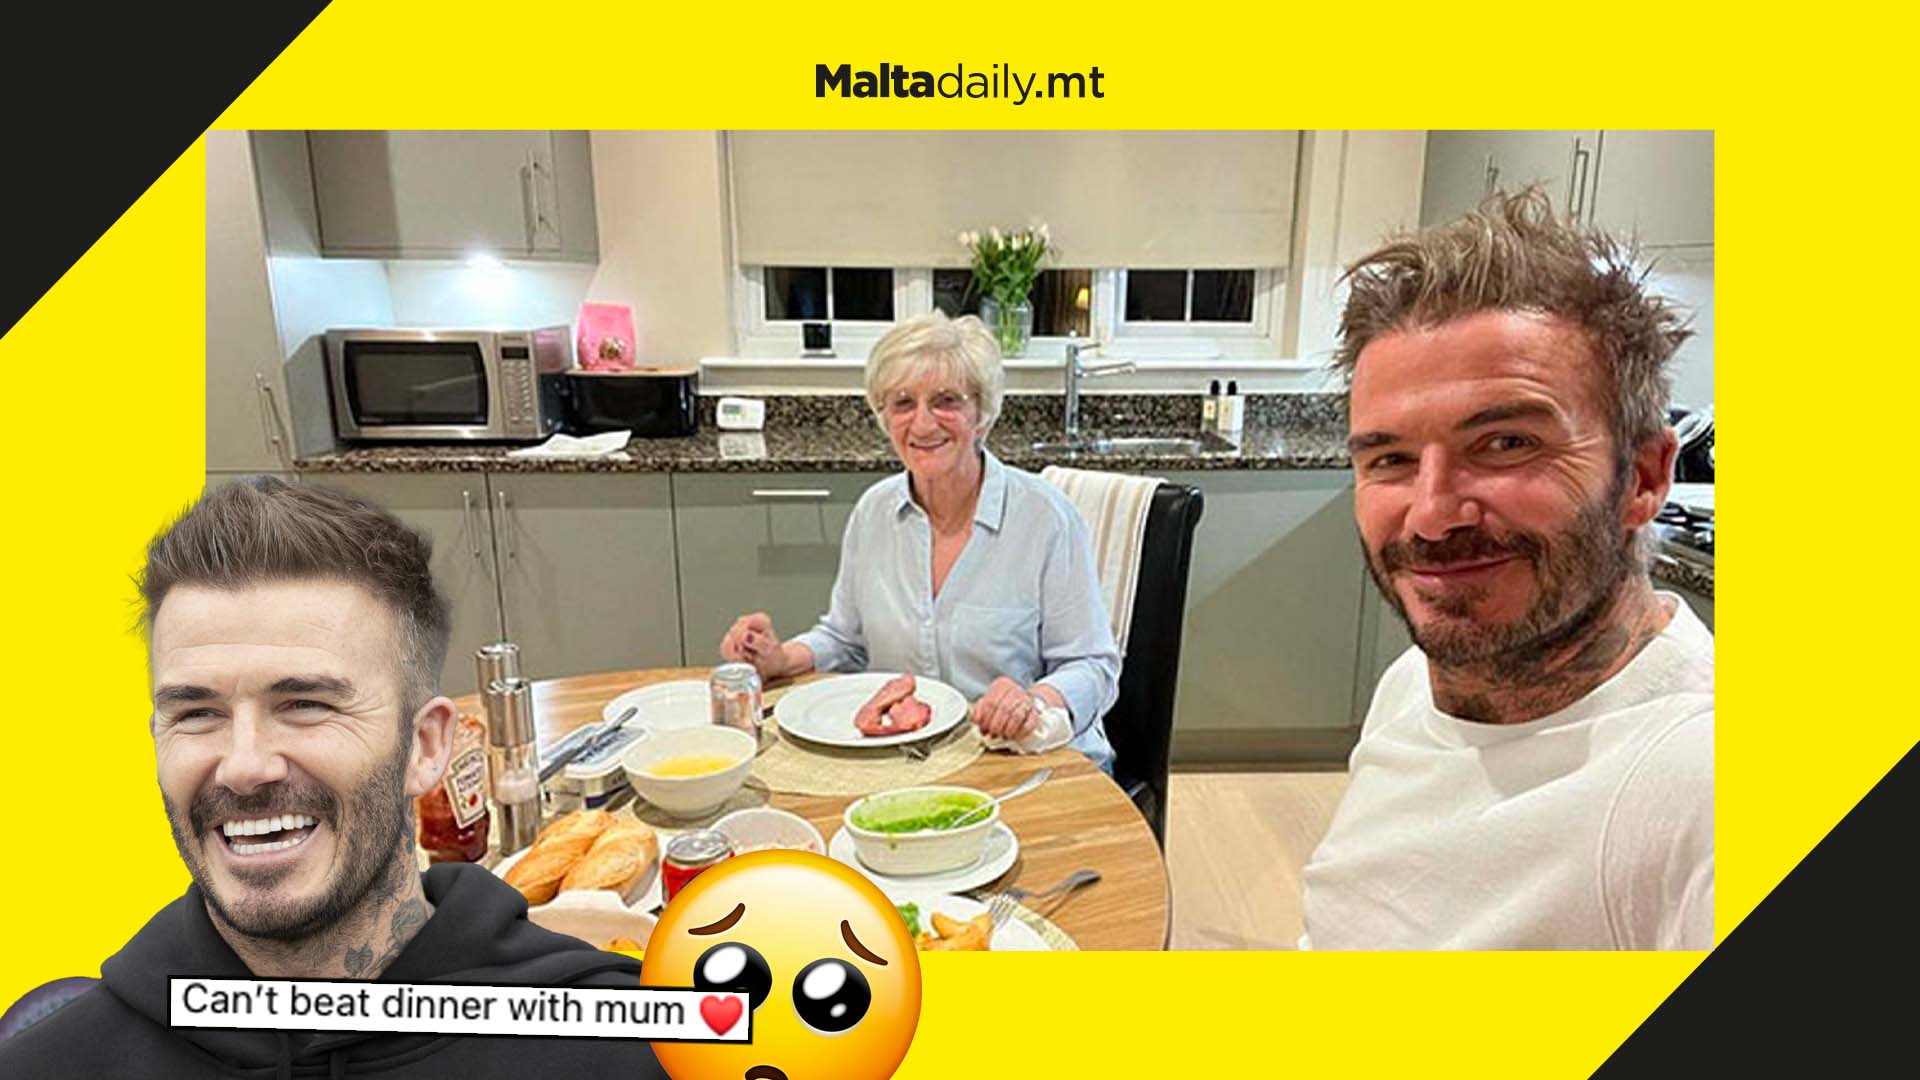 David Beckham still finds time to have dinner with his mum and you should too